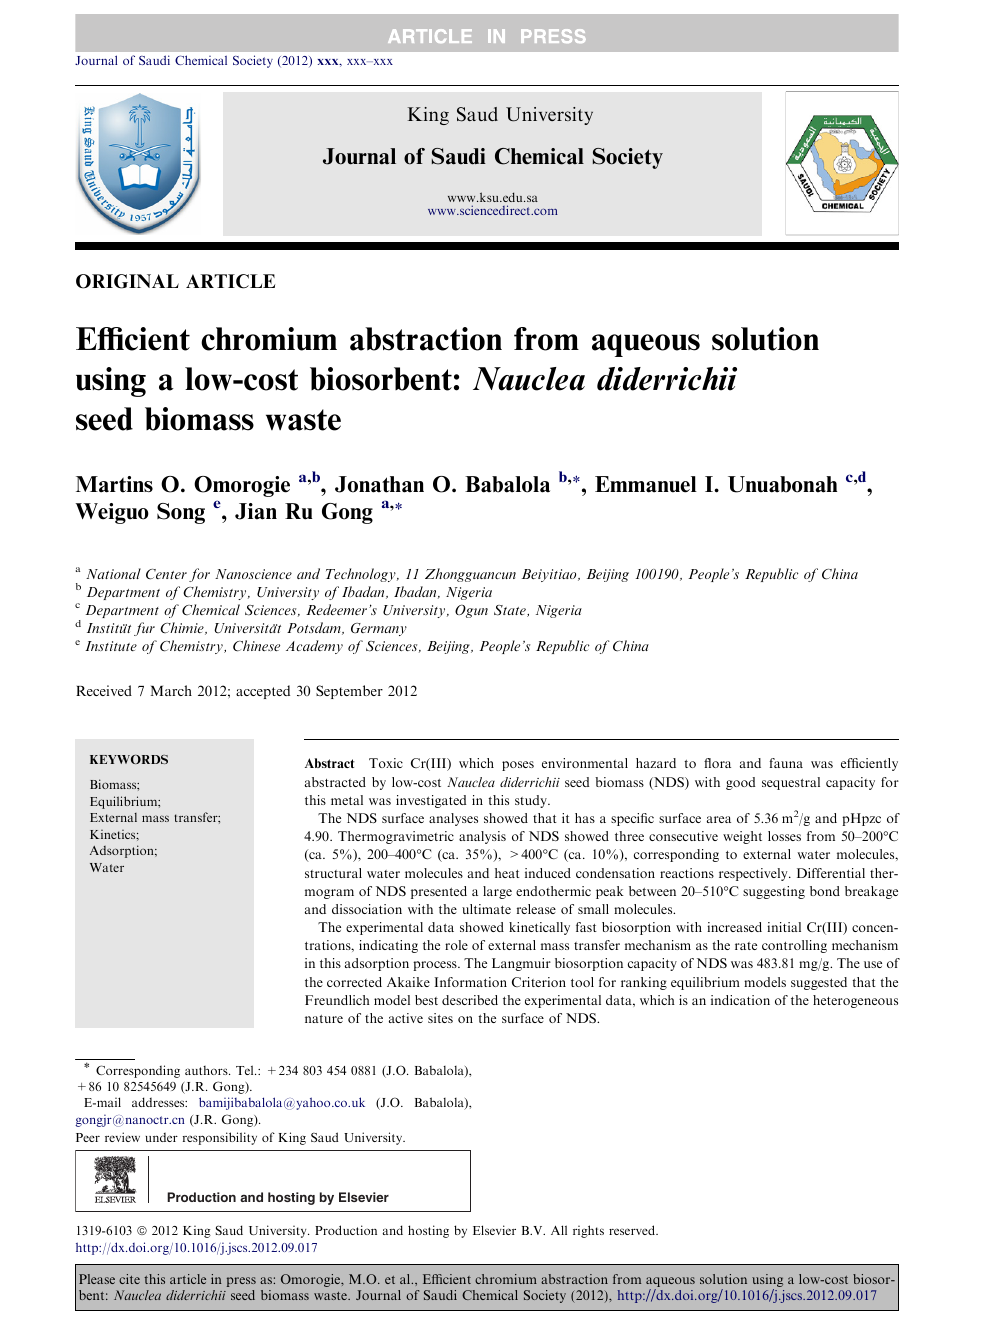 Efficient Chromium Abstraction From Aqueous Solution Using A Low Cost Biosorbent Nauclea Diderrichii Seed Biomass Waste Topic Of Research Paper In Chemical Sciences Download Scholarly Article Pdf And Read For Free On